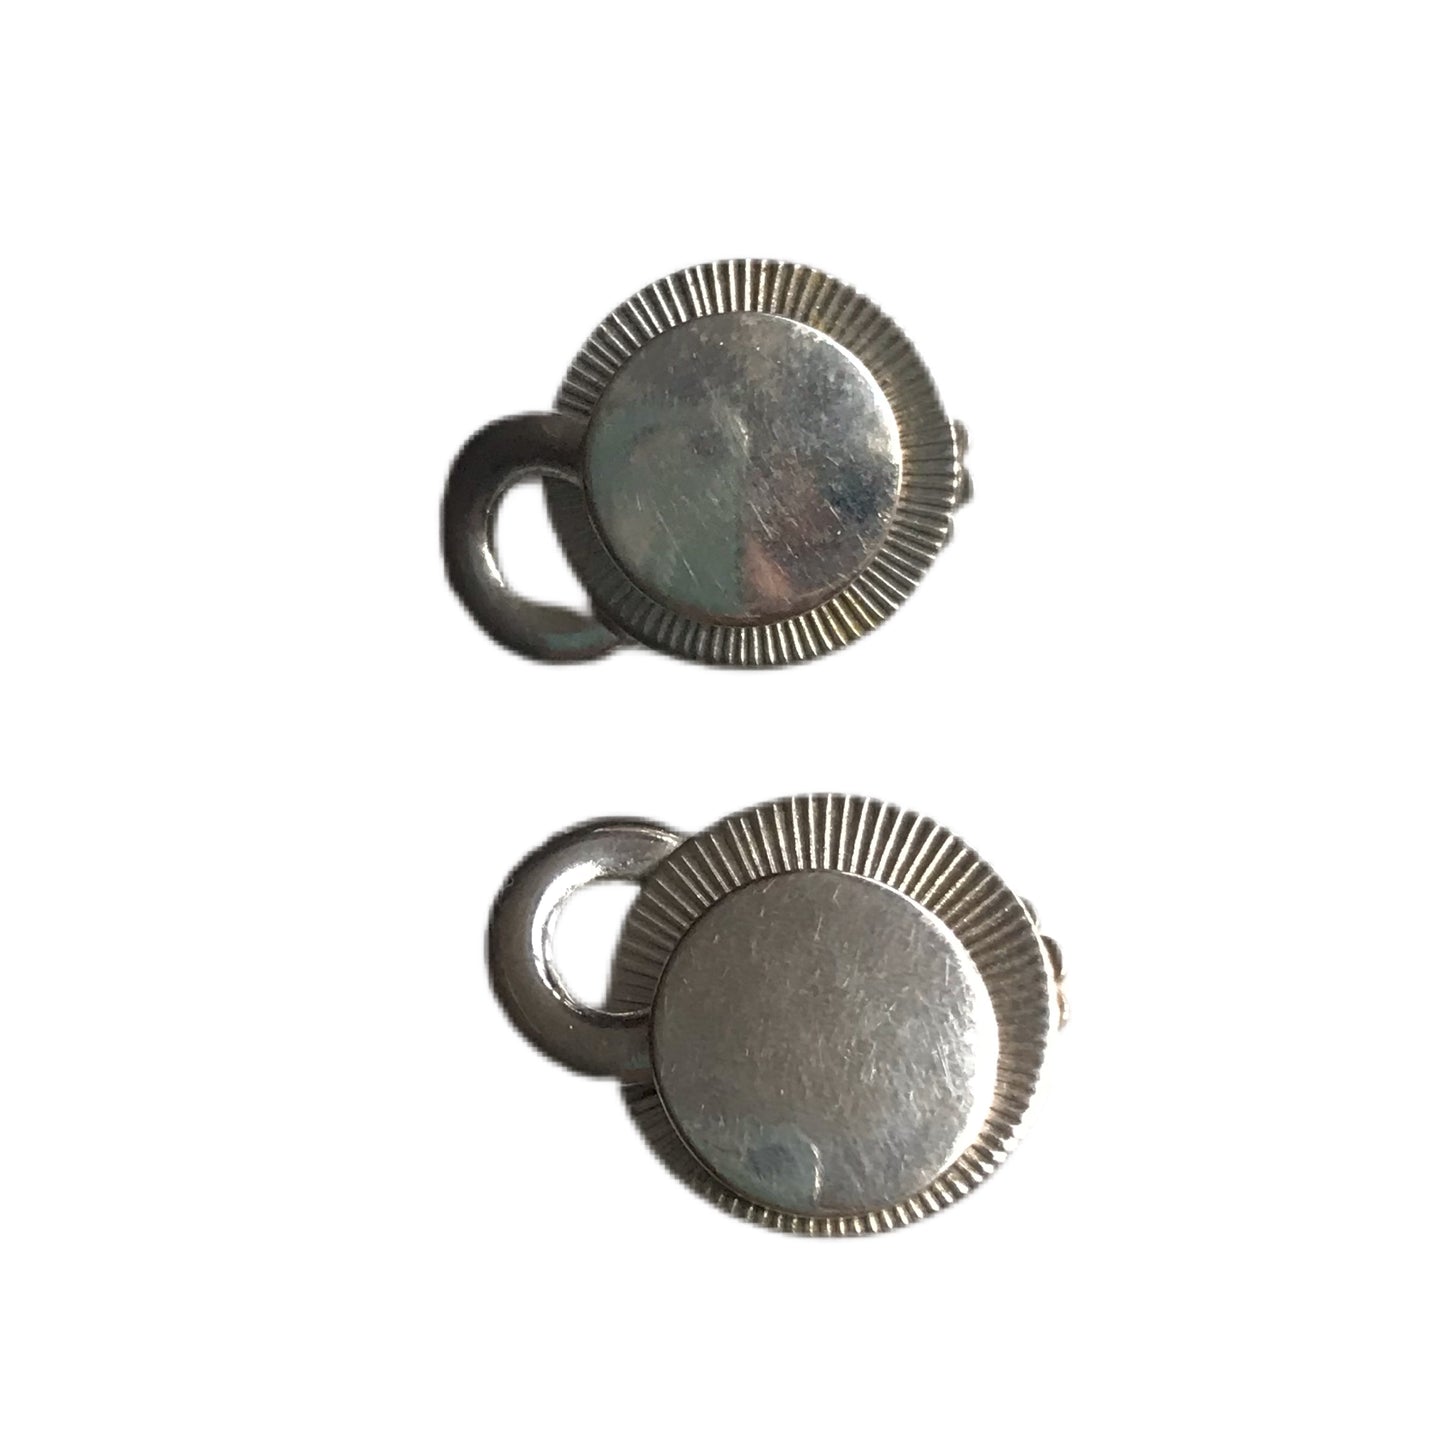 Silver Tone Metal Disc with Chain Accent Clip Earrings circa 1960s